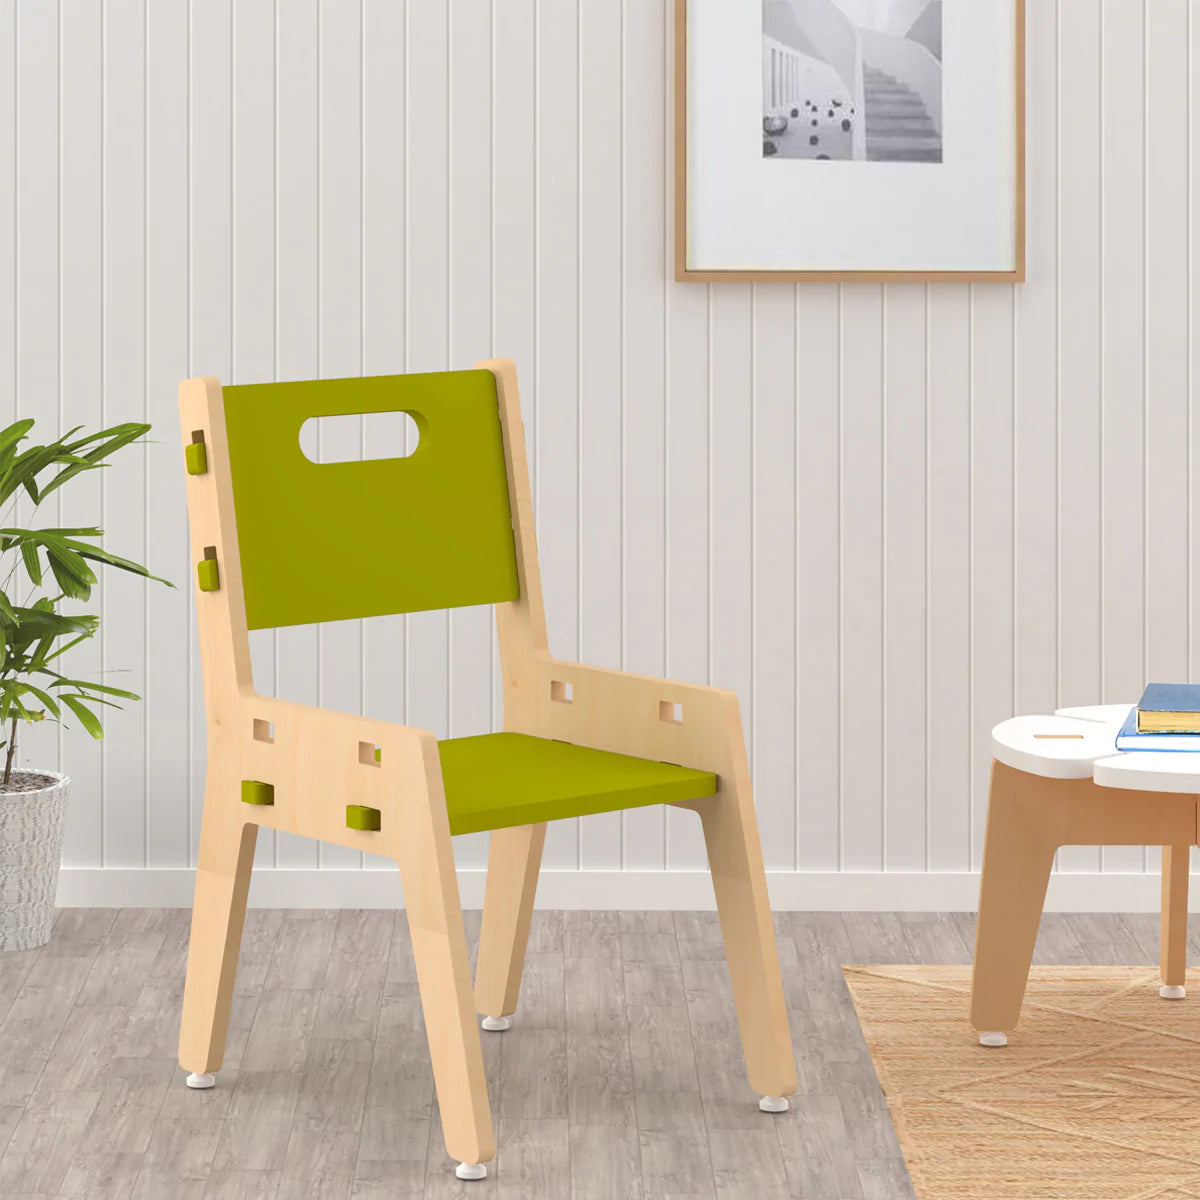 Buy Silver Peach Wooden Chair - Green - Learning Furniture - SkilloToys.com